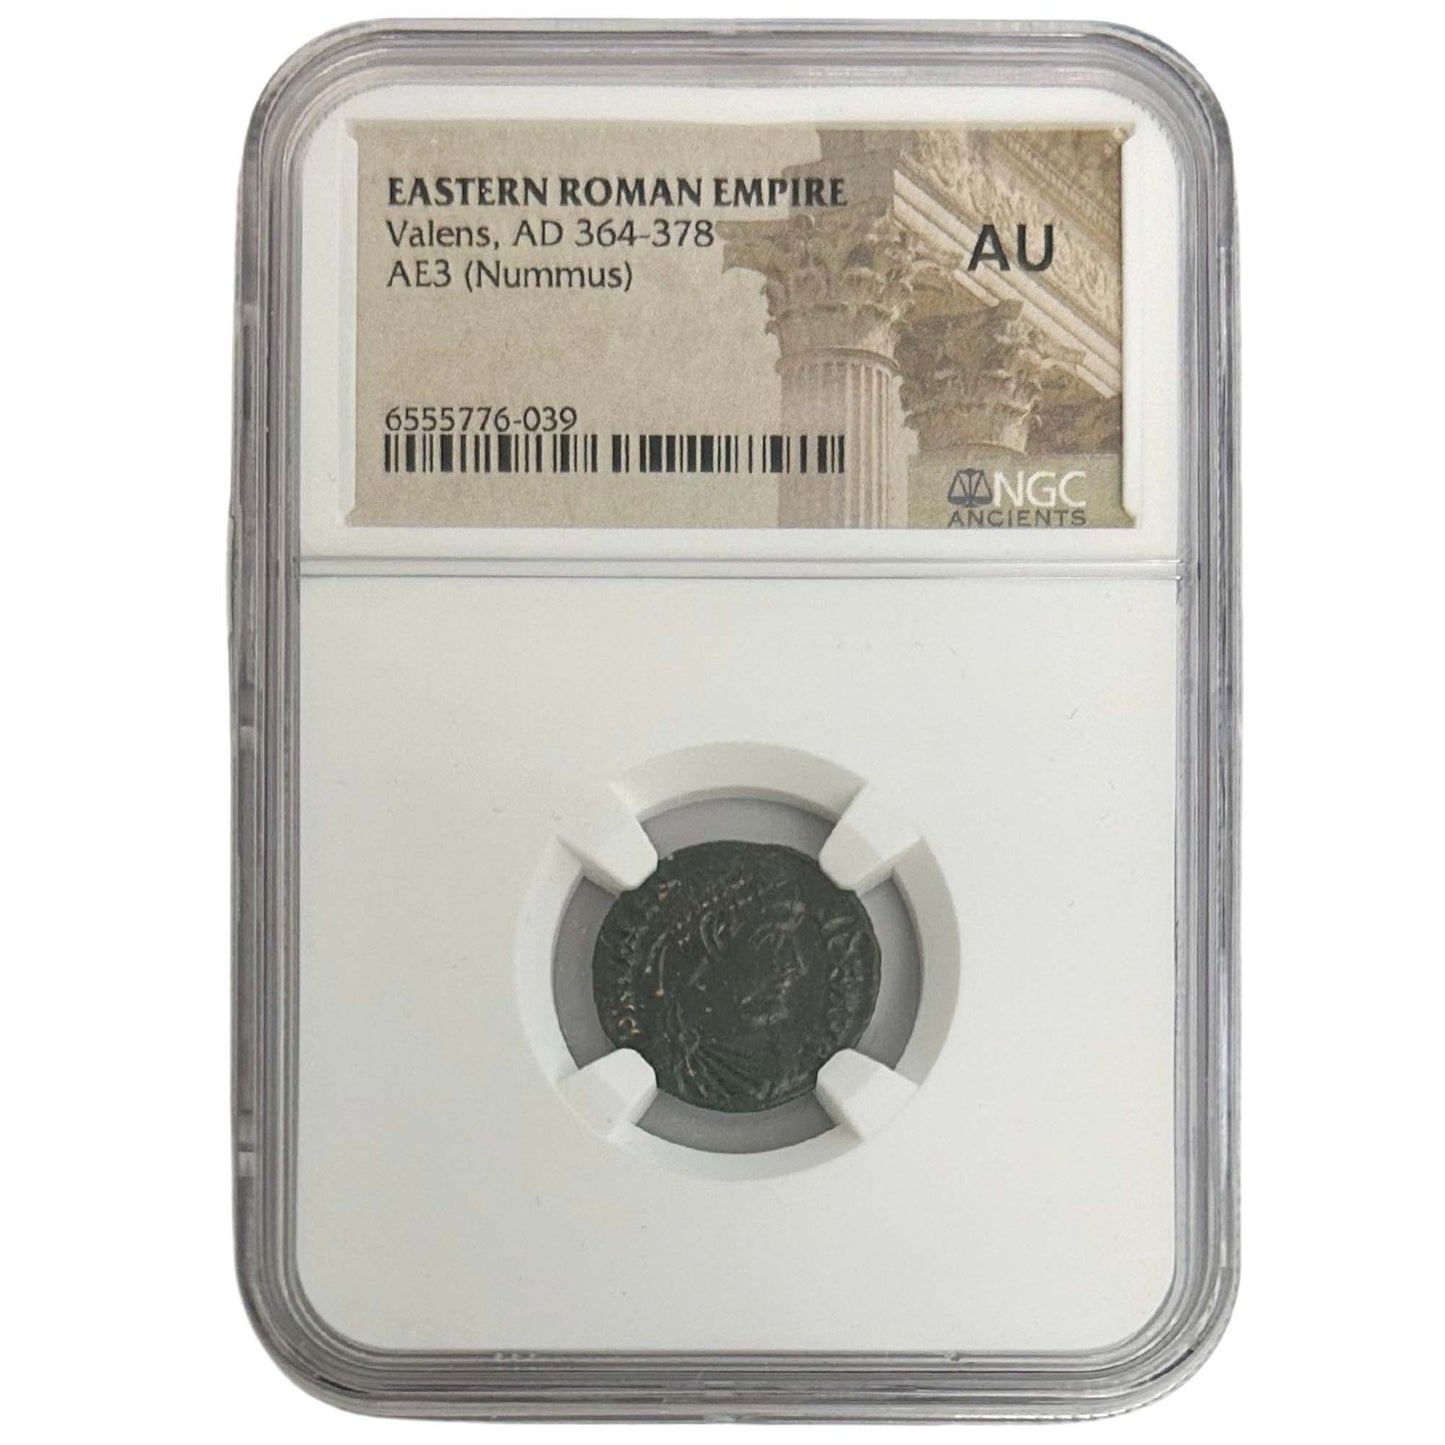 Eastern Roman Empire Valens, AD 364-378 AE3 (Nummus) AU Graded NGC Front